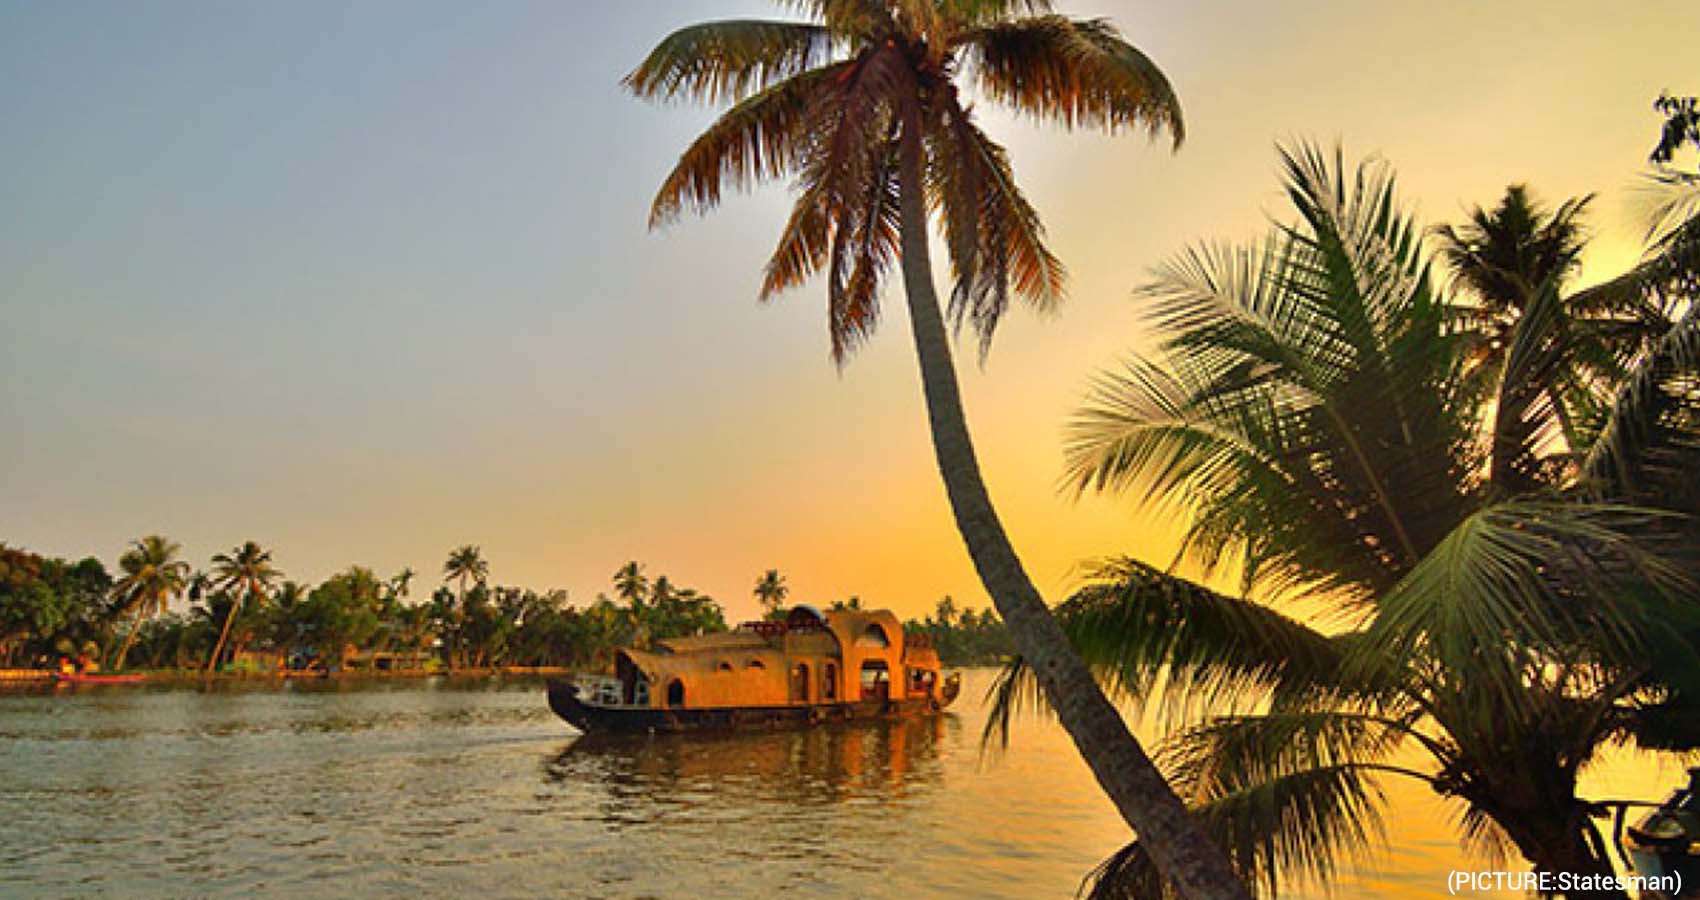 Kerala Named ‘The Most Welcoming Region’ For The 4th Time